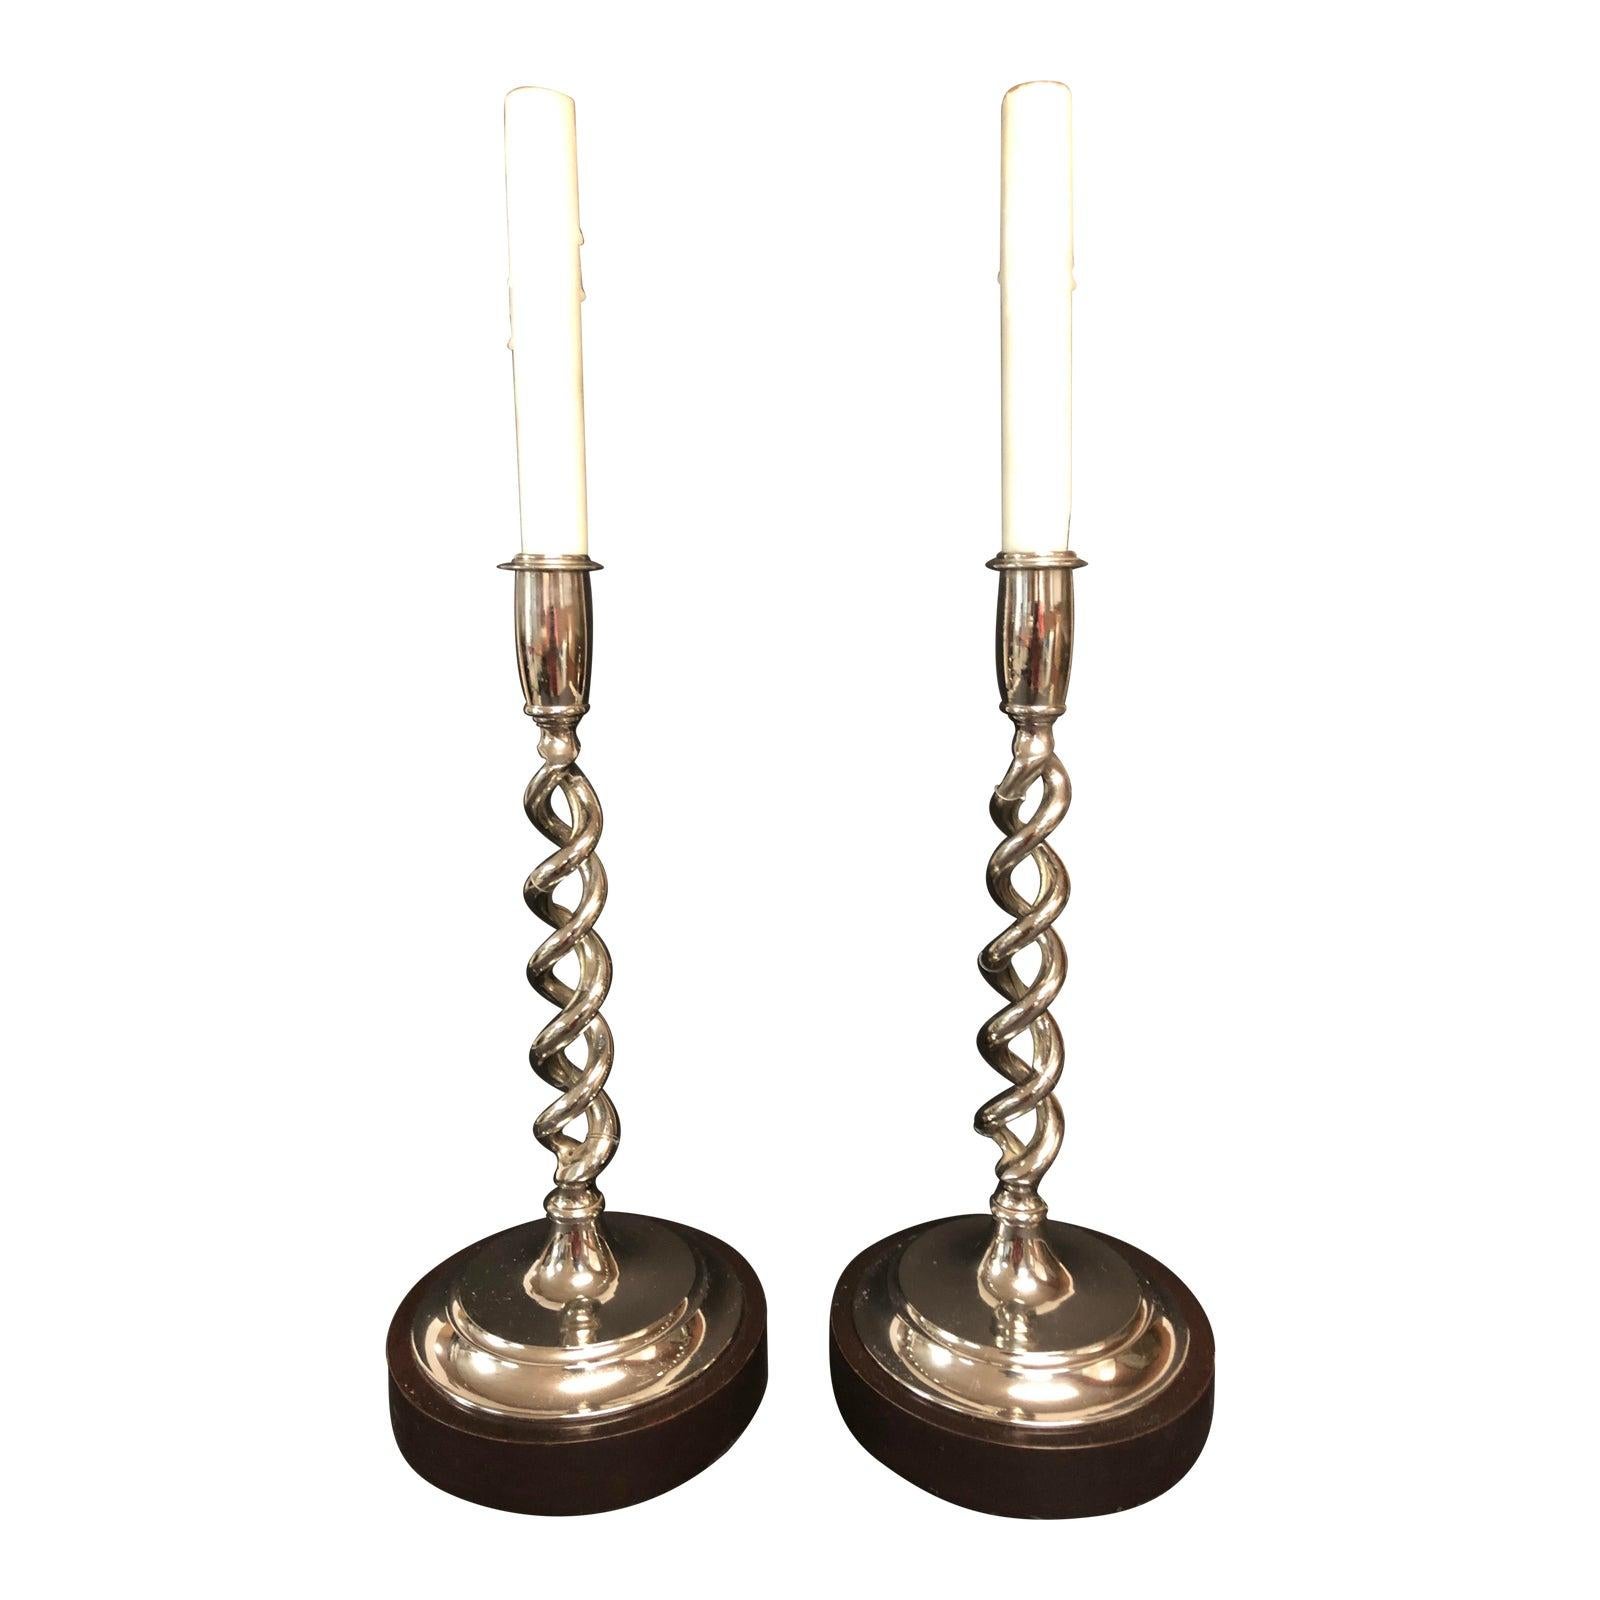 19th Century Pair of Open Barley Twist Candlestick Lamps